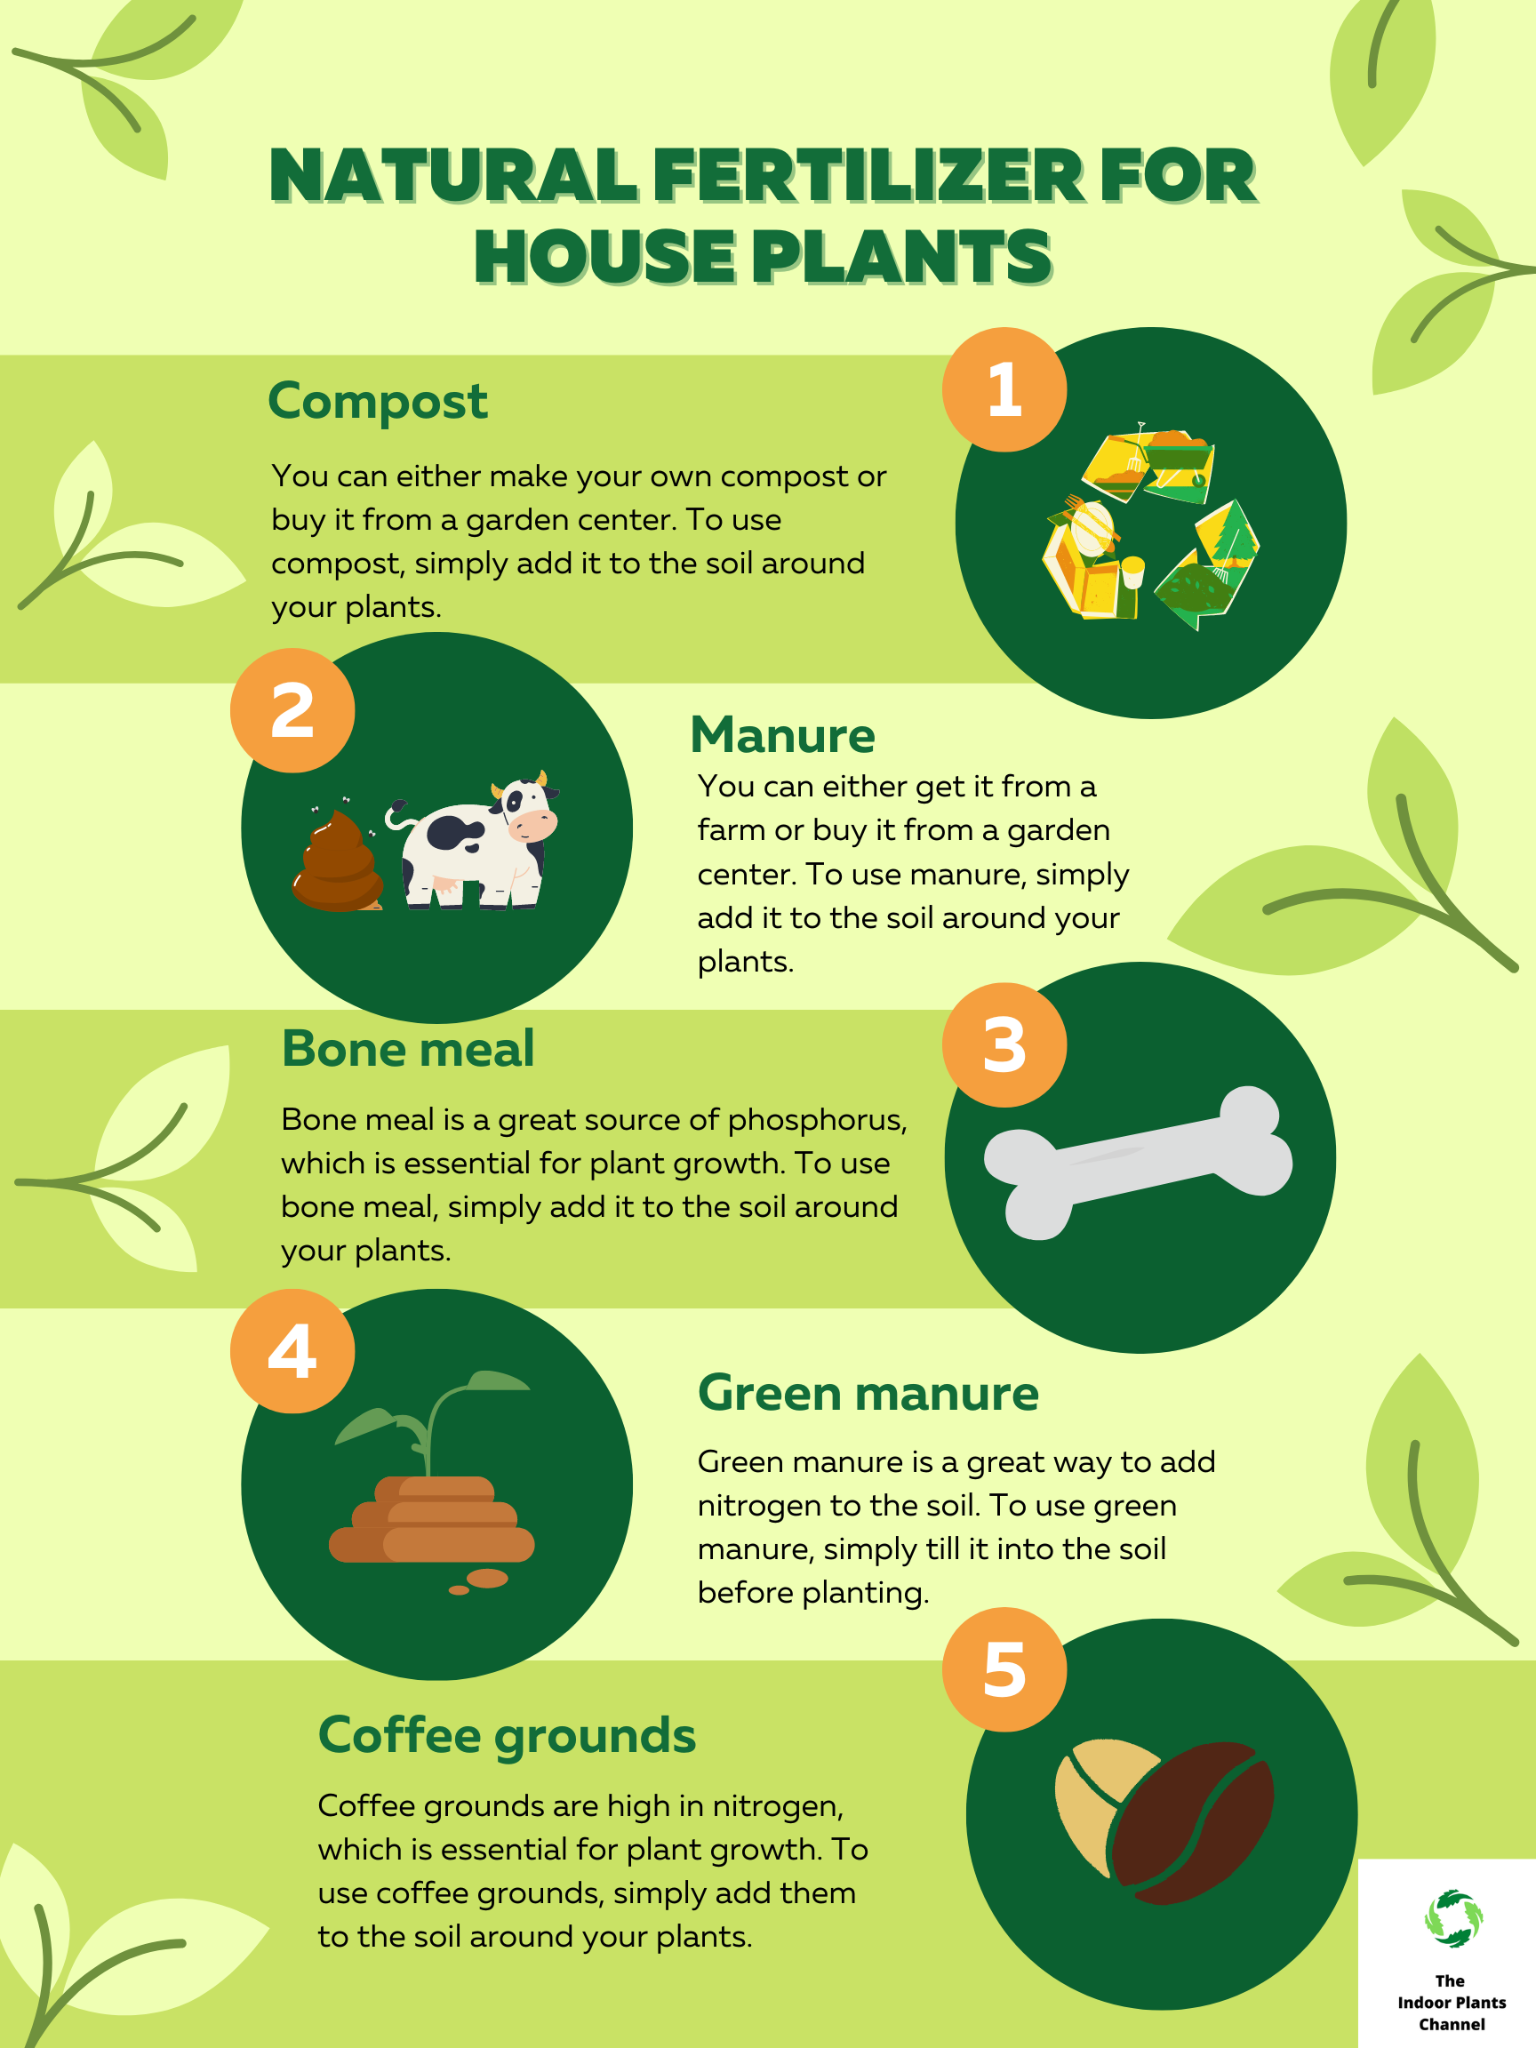 How To Fertilize House Plants Naturally